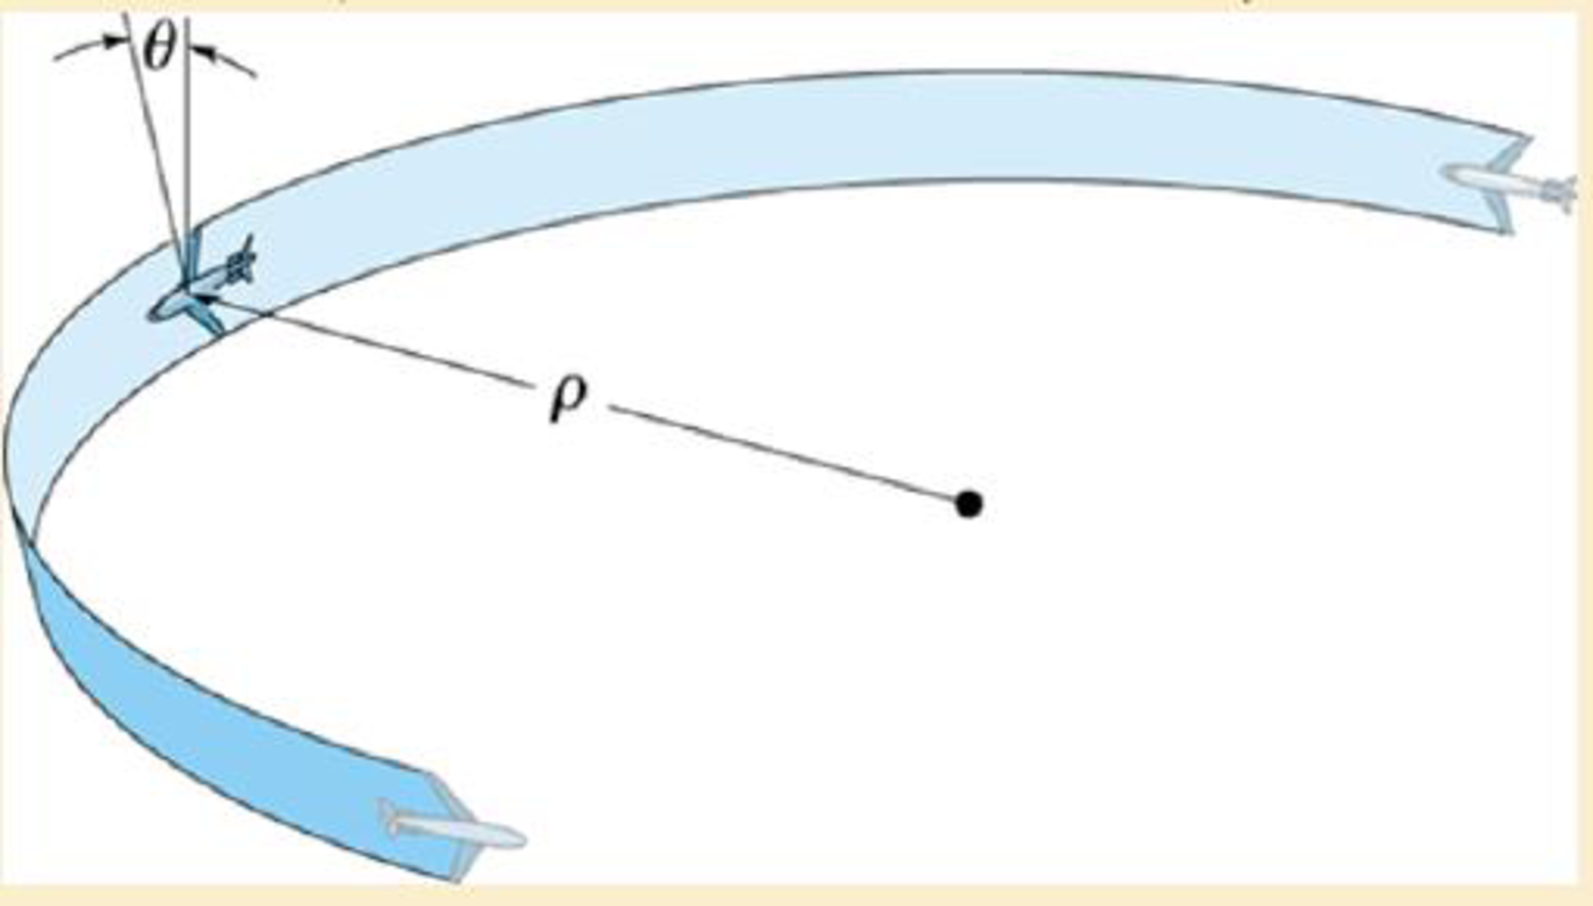 Chapter 13.5, Problem 79P, The airplane, traveling at a constant speed of 50 m/s, is executing a horizontal turn. If the plane 